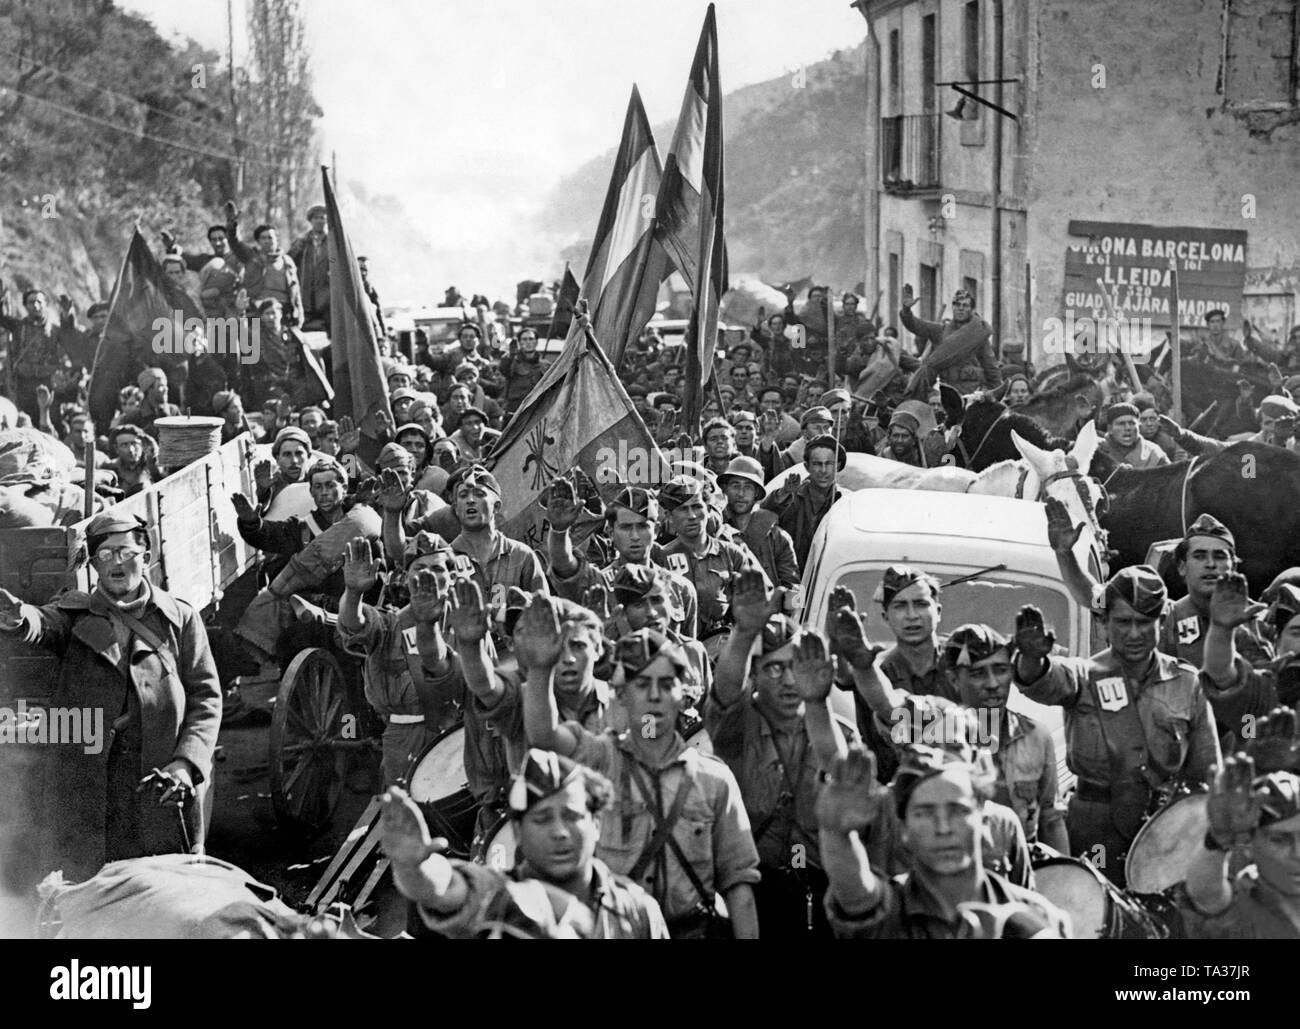 A unit of the Franco troops arrive on the Spanish-French border in Le Perthus on February 10, 1939. The soldiers greet with the Fascist salute. In the background is a flag of the Fascist Party (Falange Espanola Tradicionalista de las JONS). Stock Photo